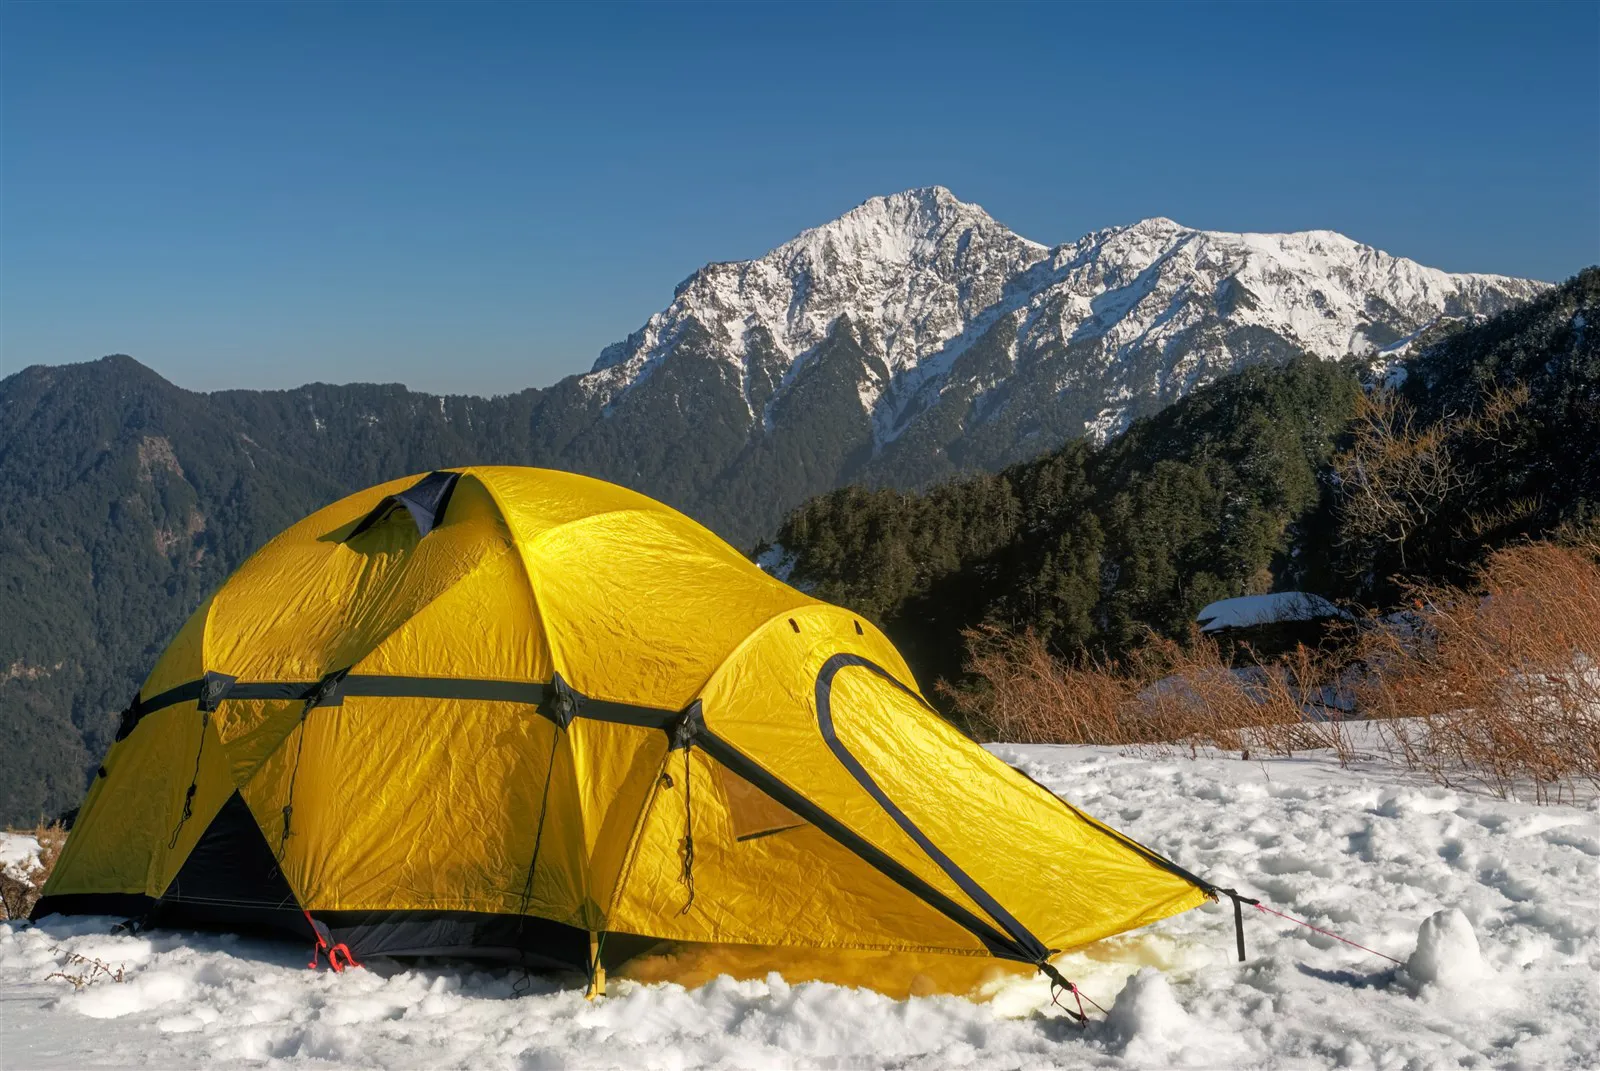 Winter camping in the UK